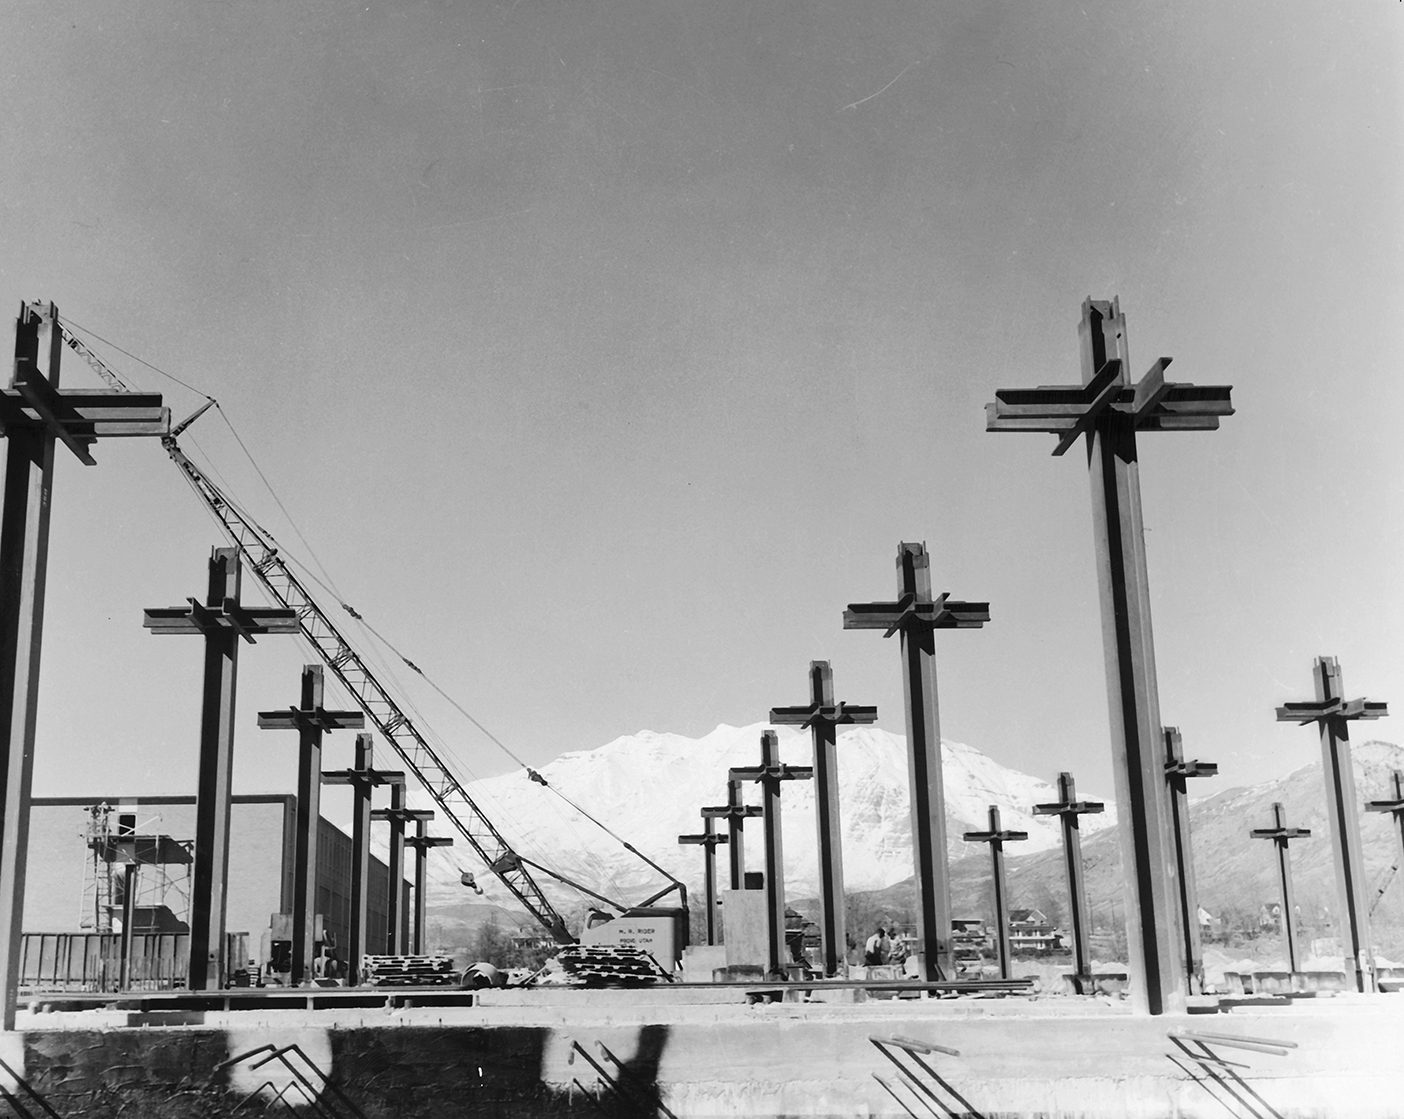 Steel cross beams showing the construction of a library at BYU.